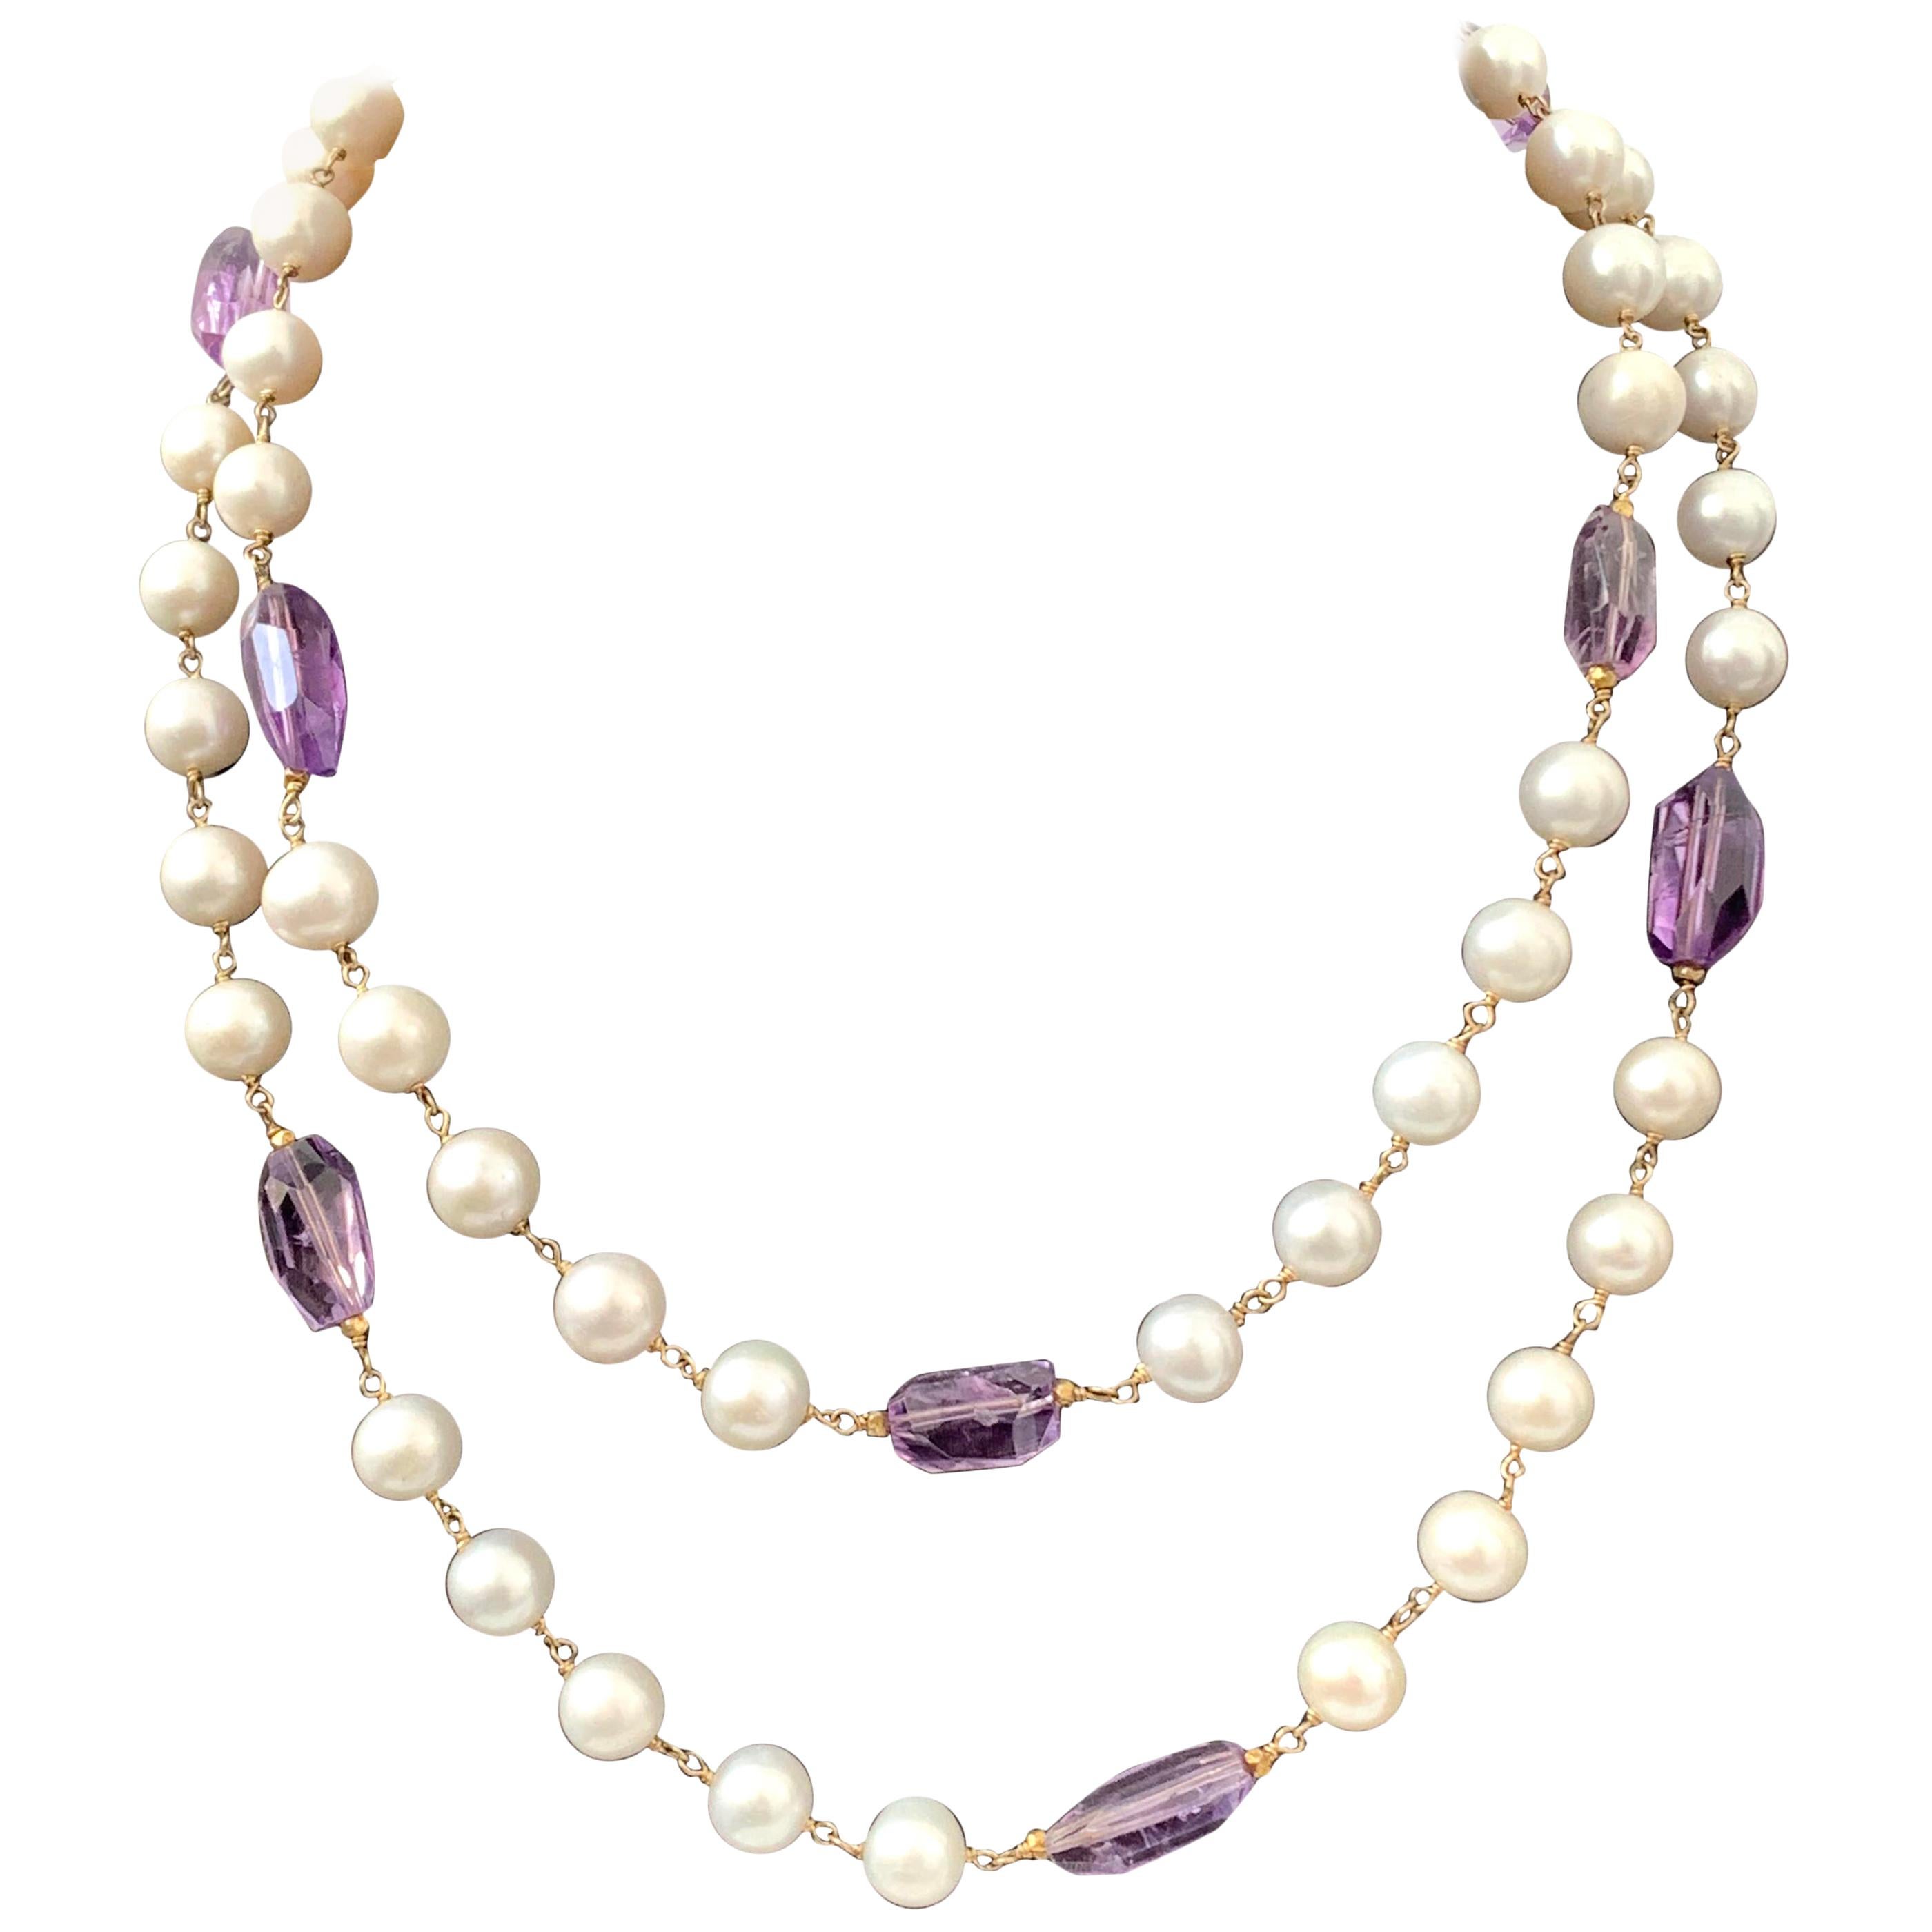 18k gold-filled Genuine Faceted Amethyst and Cultured Pearl Necklace 43"